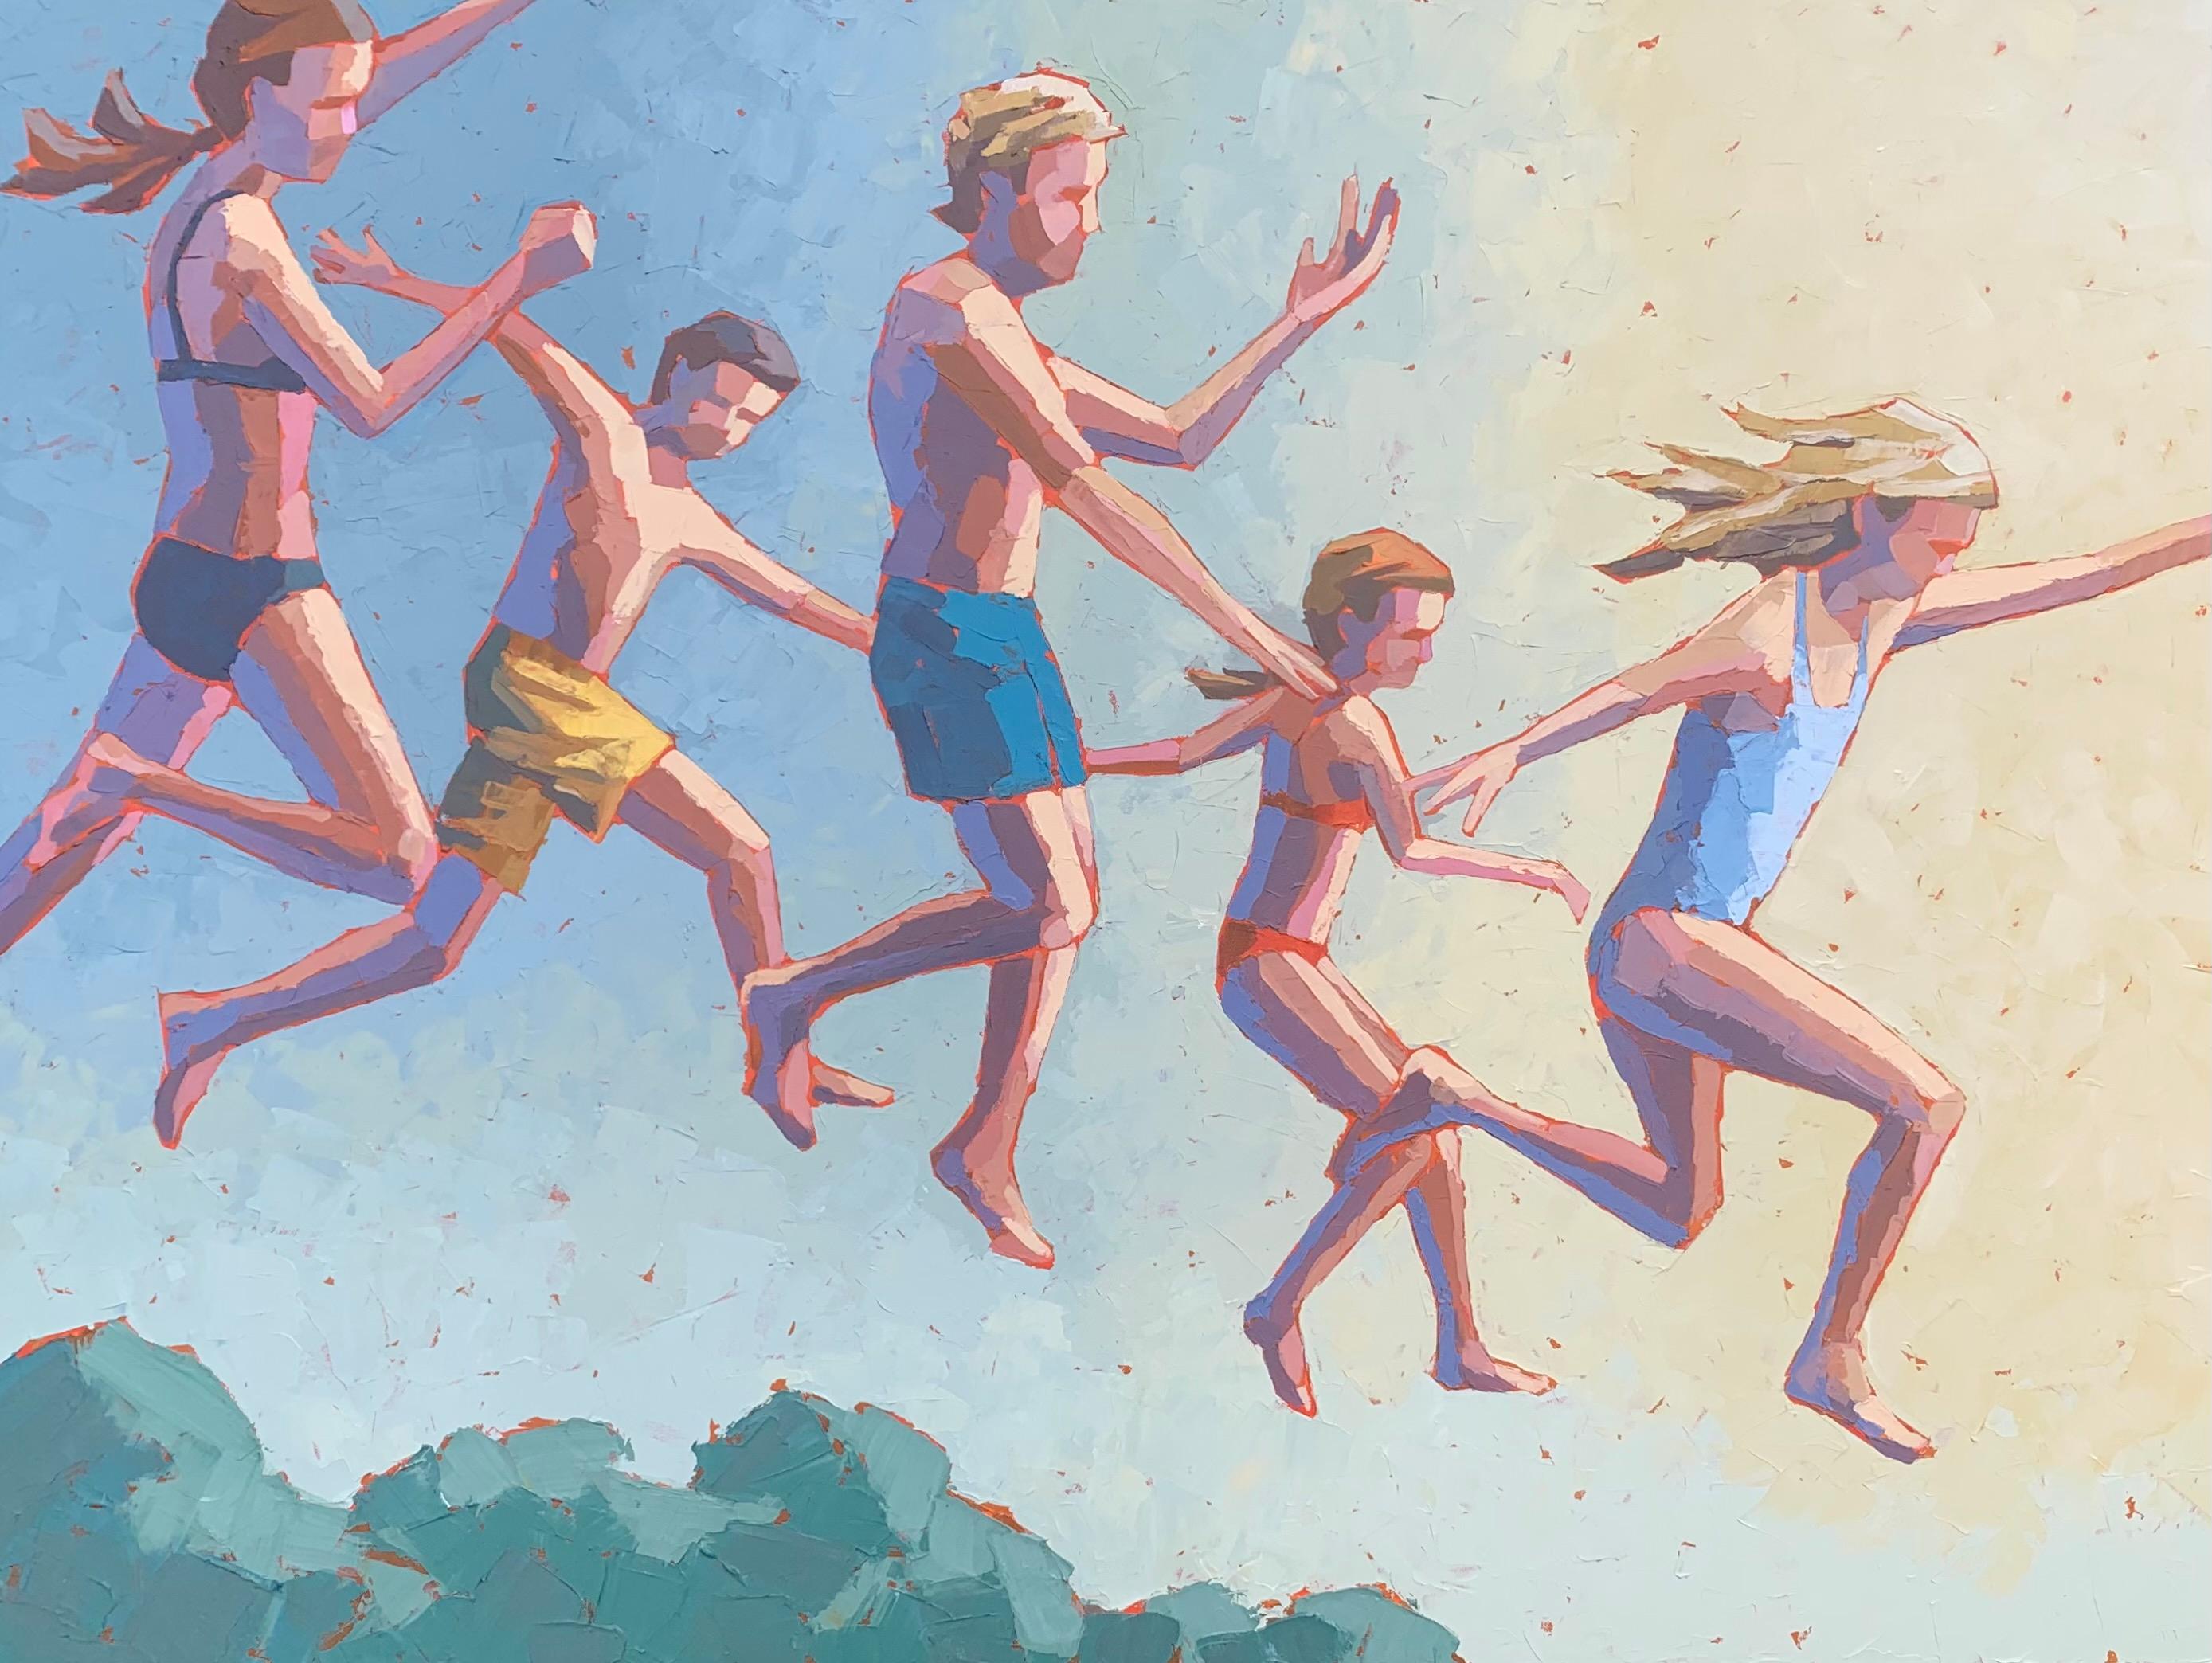 Paul Norwood Figurative Painting - "Look Out Below" acrylic painting of five children in mid jump